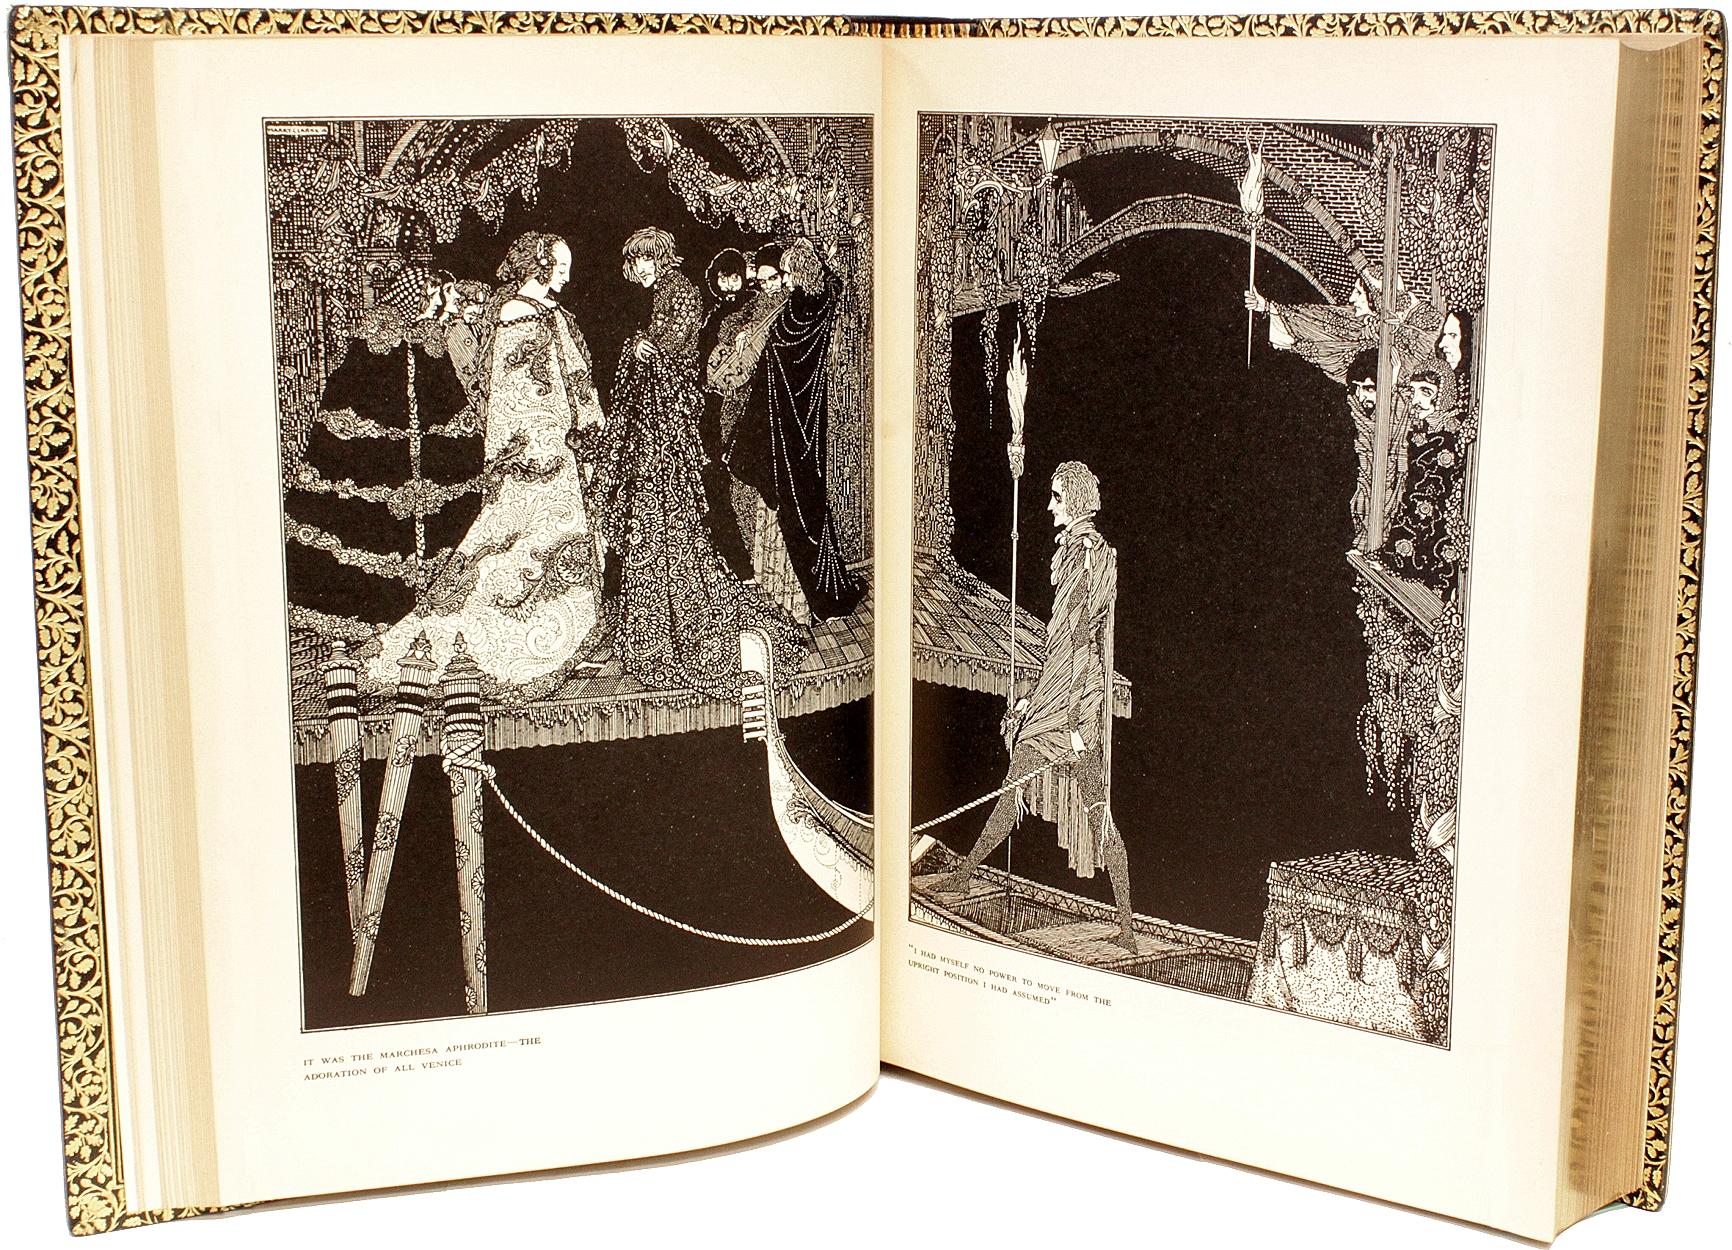 American Poe, Tales of Mystery and Imagination, Illustrated by Harry Clarke, 1933